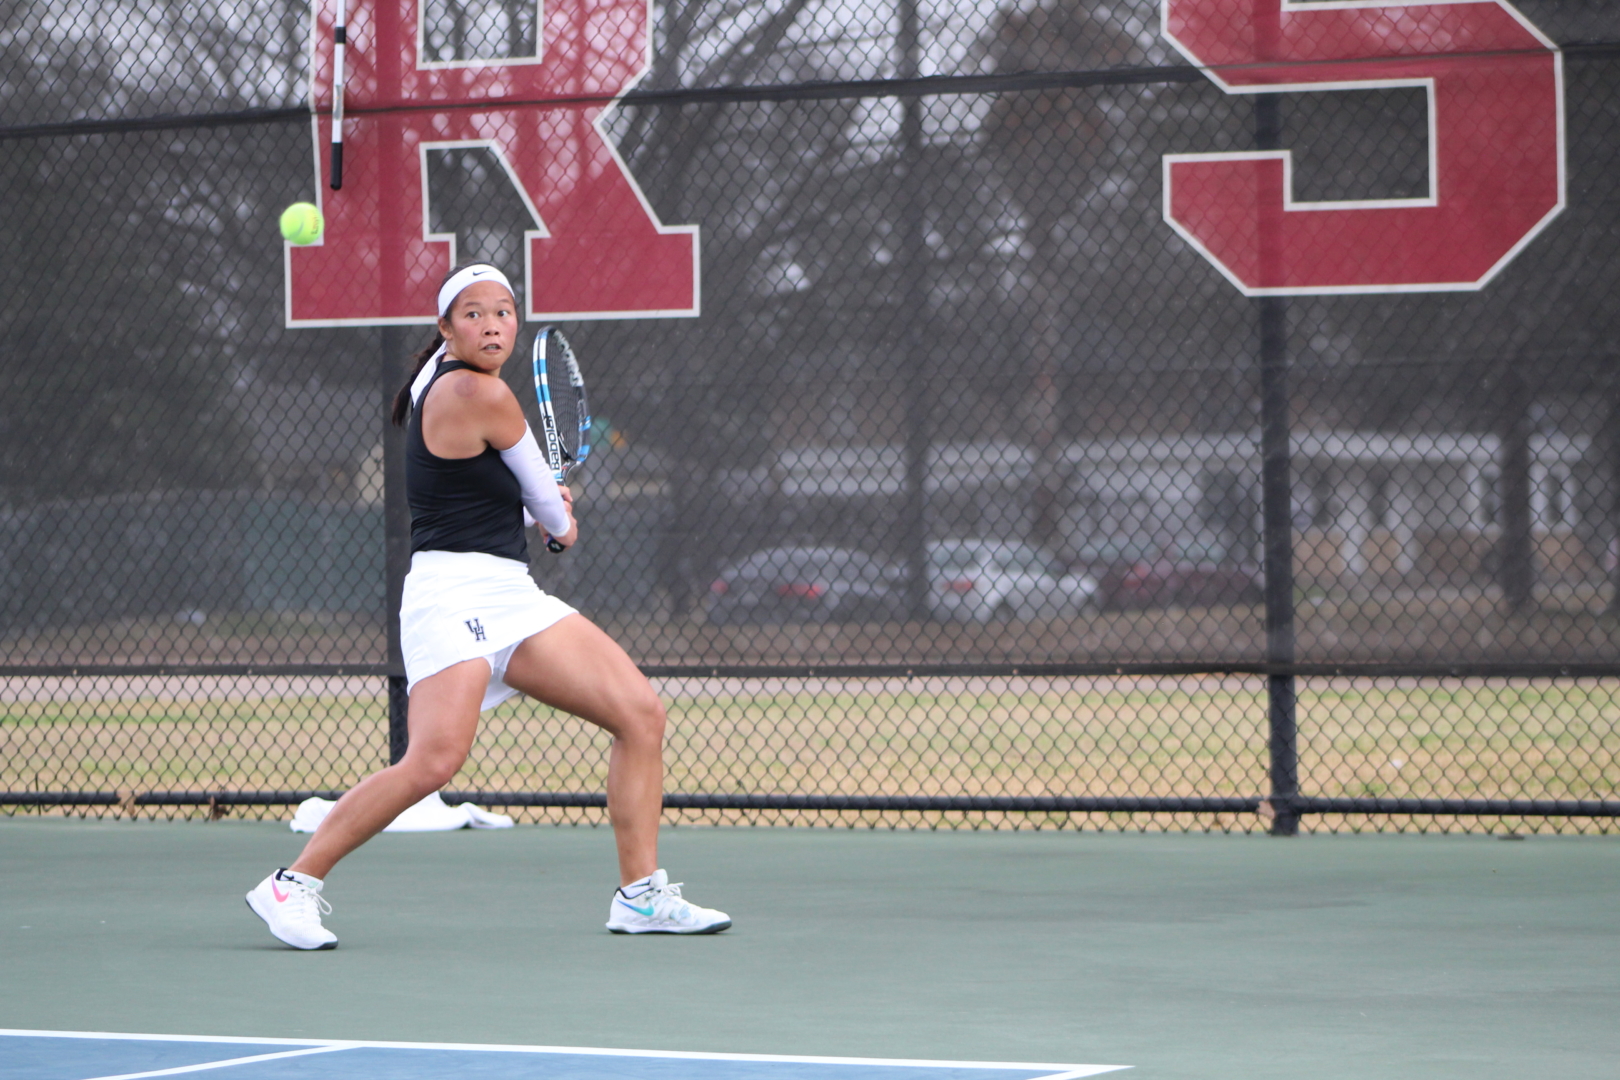 UH tennis senior Phonexay Chitdara locks in on the ball during a match for the Cougars. | Courtesy of UH athletics